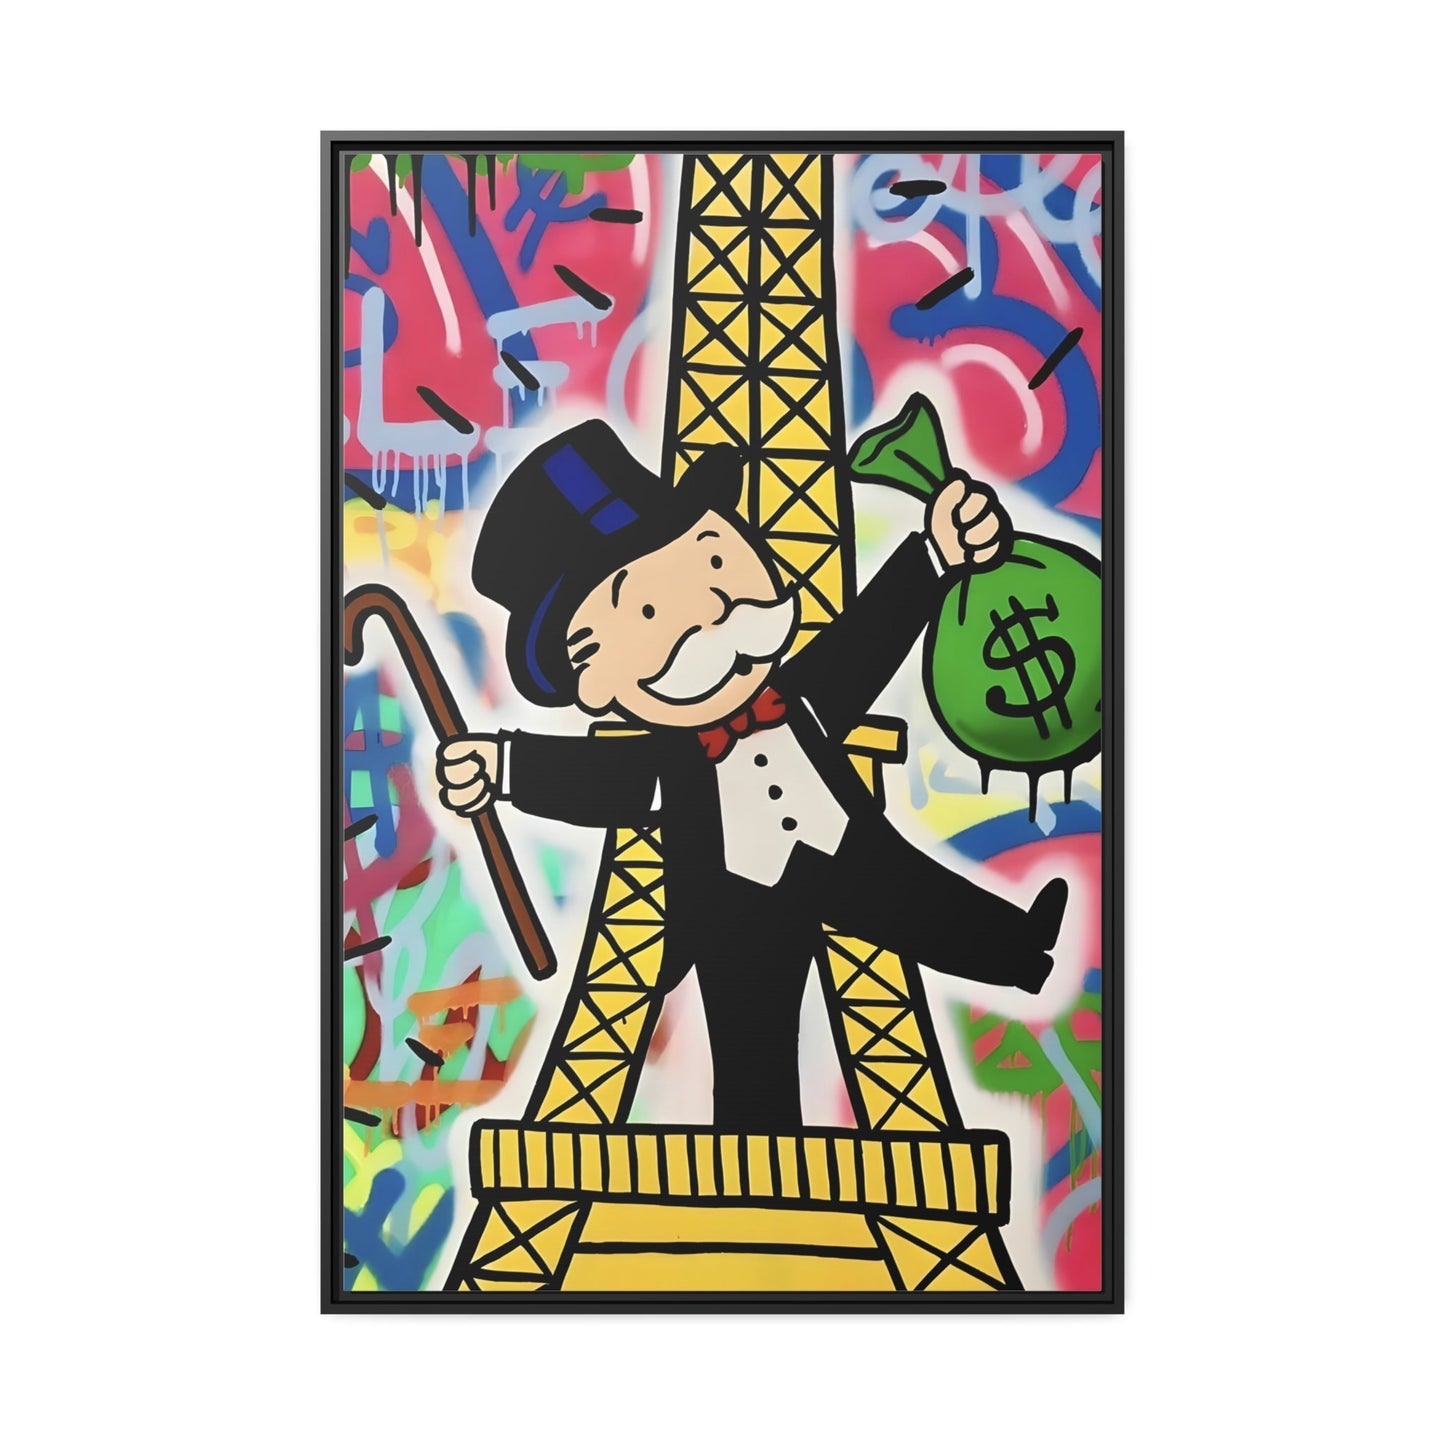 Living Large: Alec Monopoly's Artistic Prints on Framed Canvas Featuring Images of Wealth and Luxury